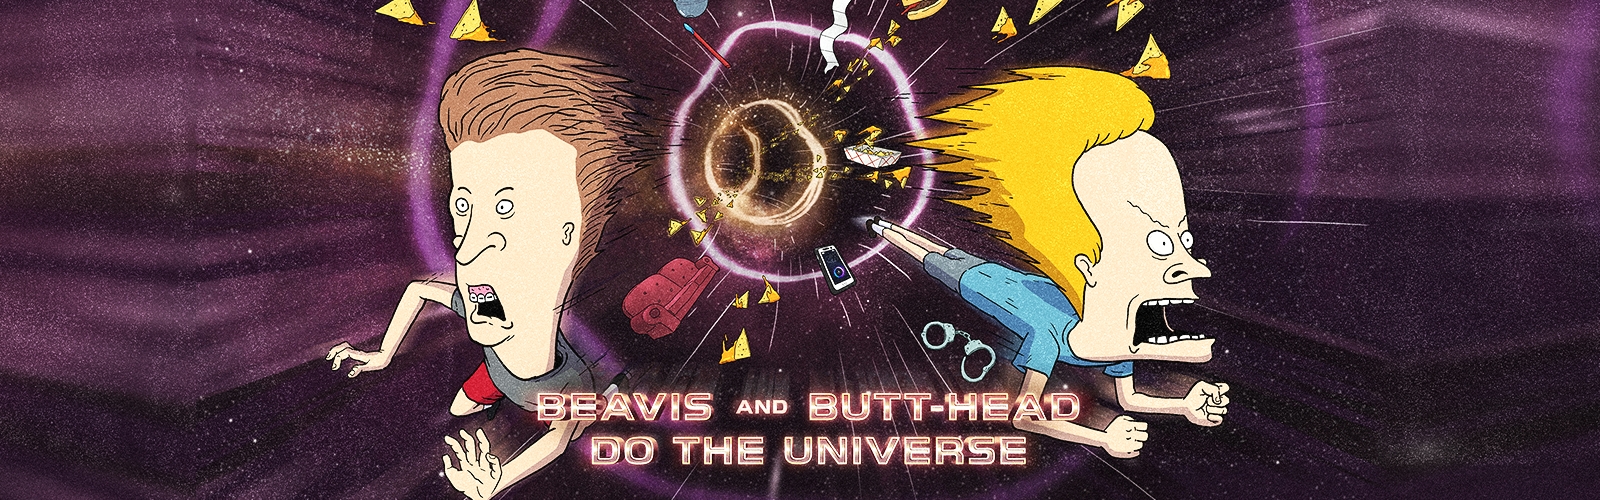 download bevis and butt head do the universe